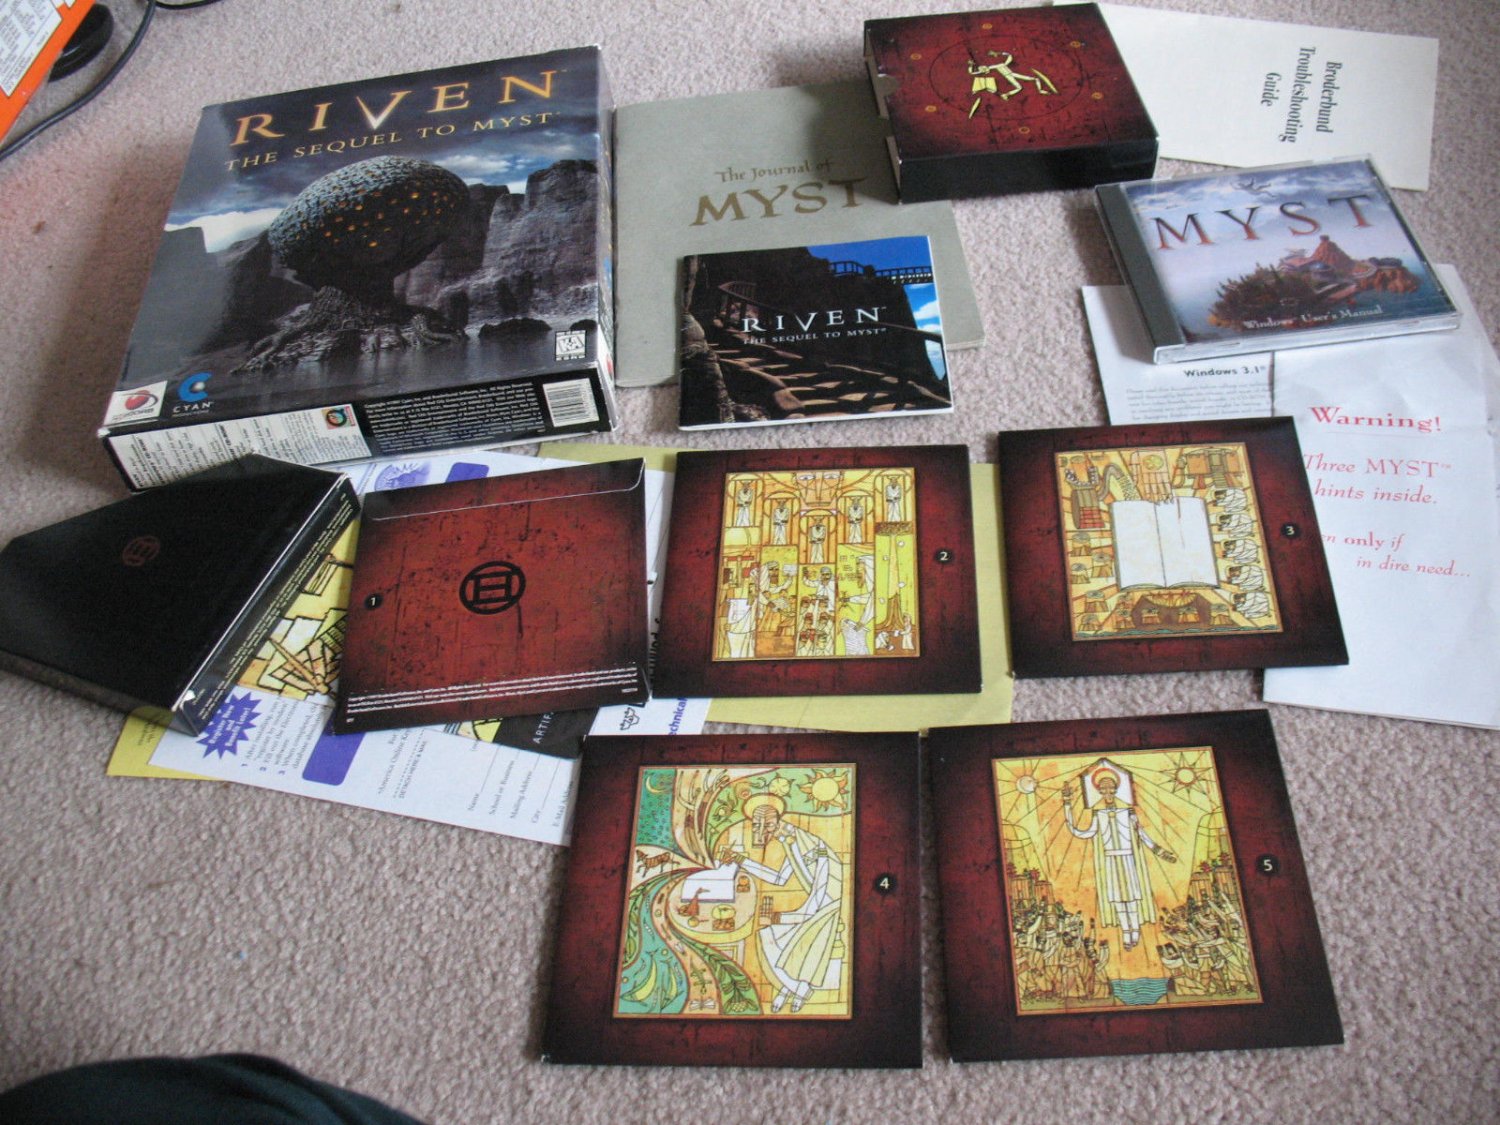 no myst book box with myst games